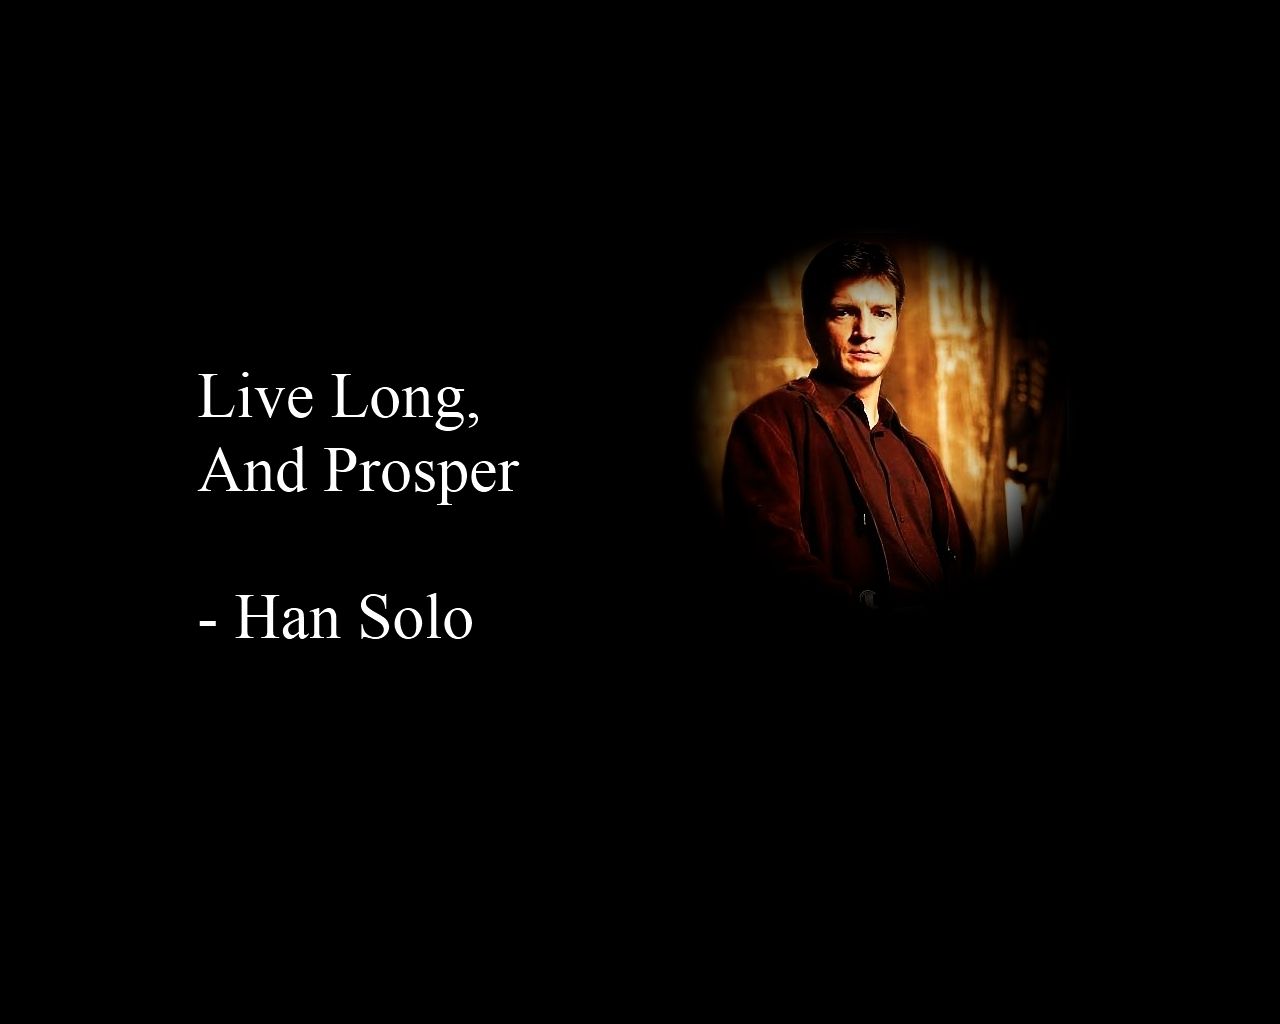 star wars star trek quotes funny firefly wrong han solo nathan fillion 1280x1024 wallpaper High Quality Wallpaper, High Definition Wallpaper